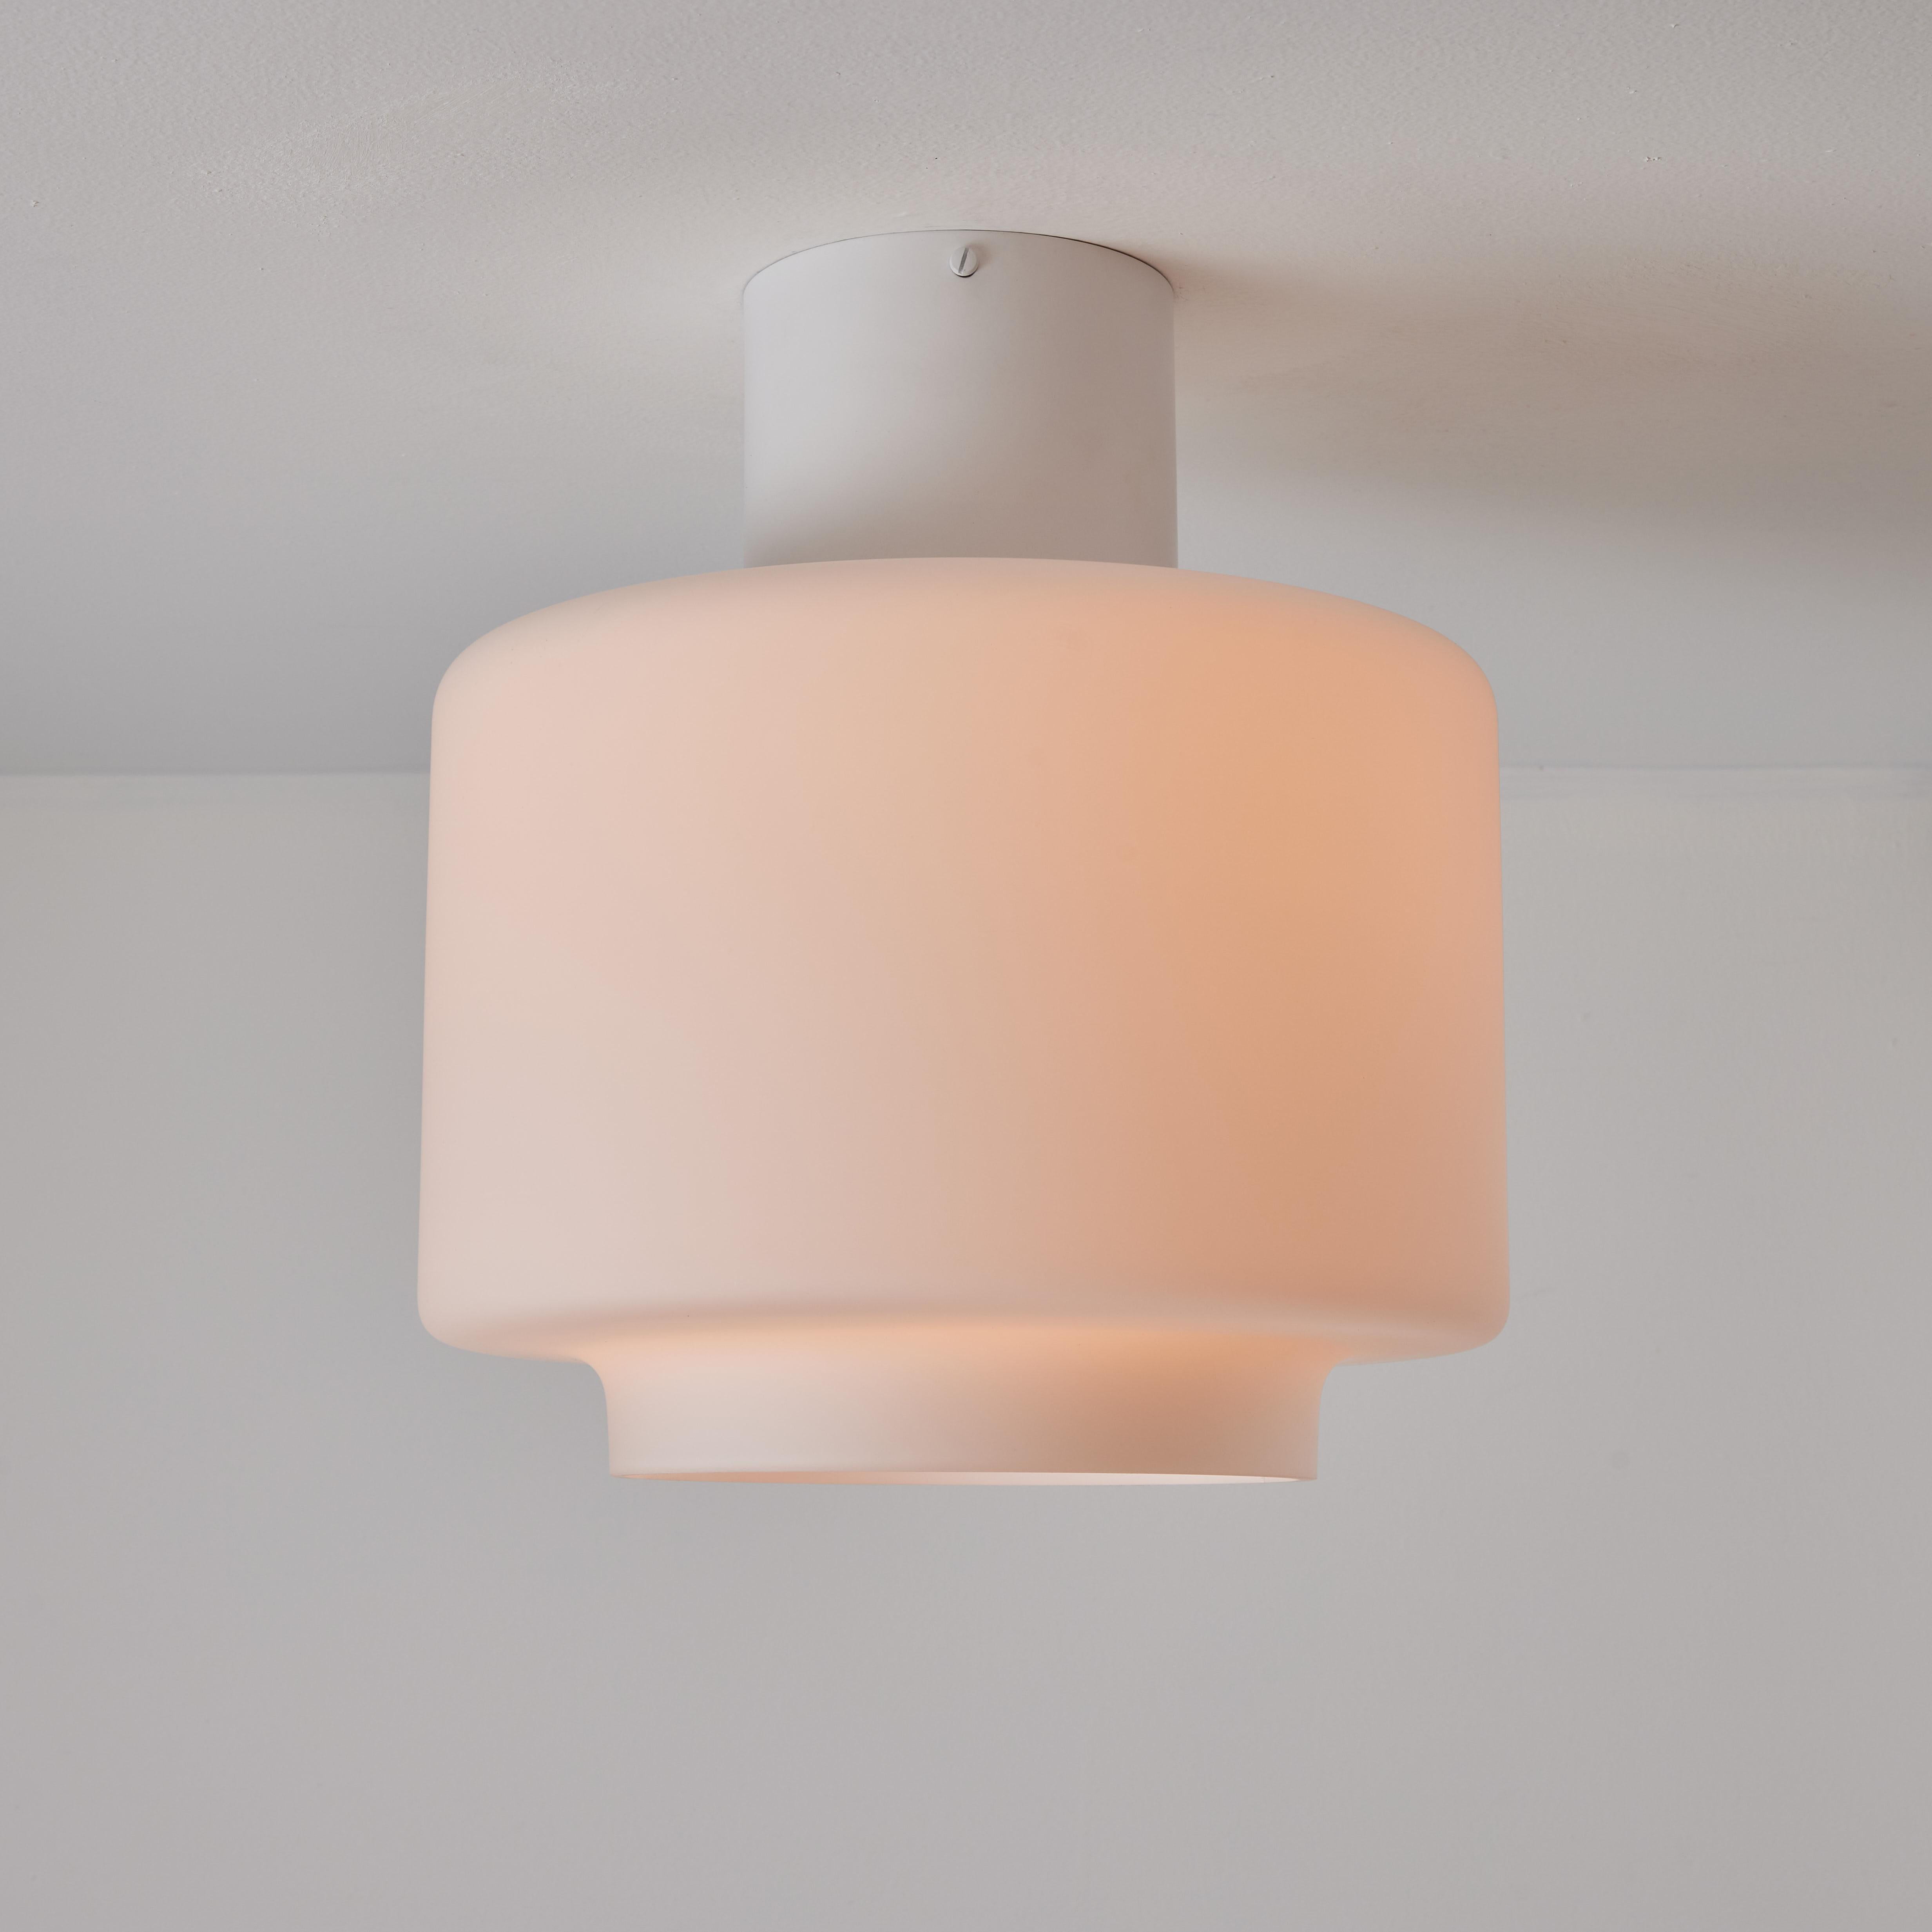 Painted 1960s Mauri Almari Opaline Glass and White Metal 'AE 88' Ceiling Lamp for Itsu For Sale